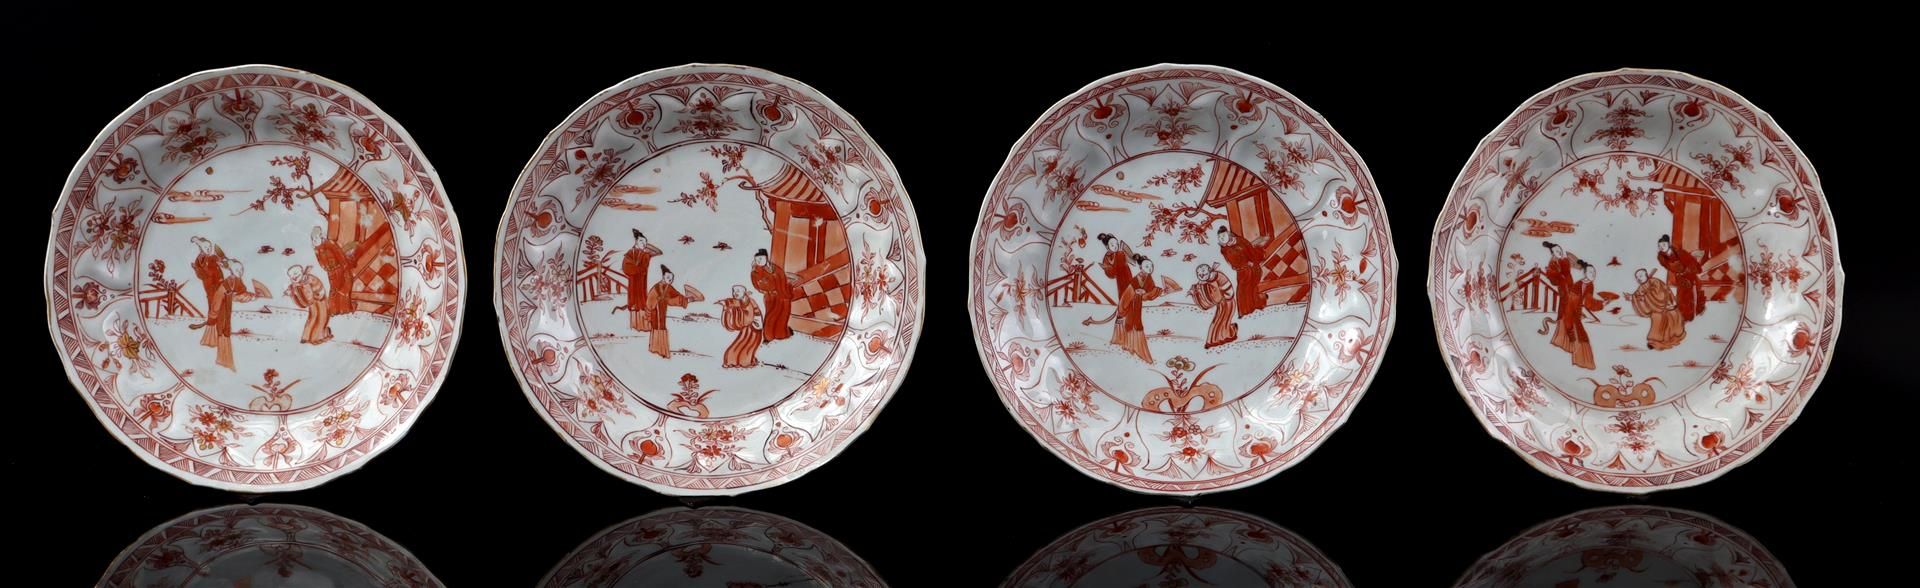 4 porcelain milk and blood dishes, Yongzheng